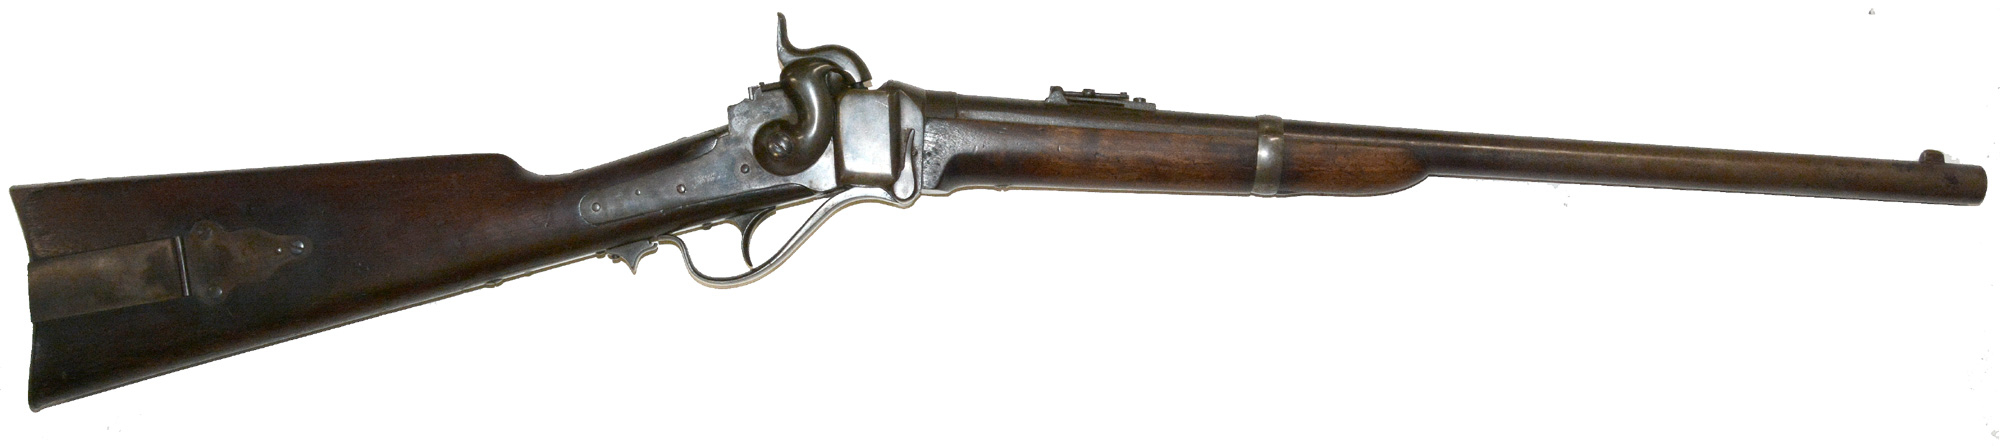 IDENTIFIED 7th INDIANA CAVALRY NEW MODEL 1863 SHARPS CARBINE